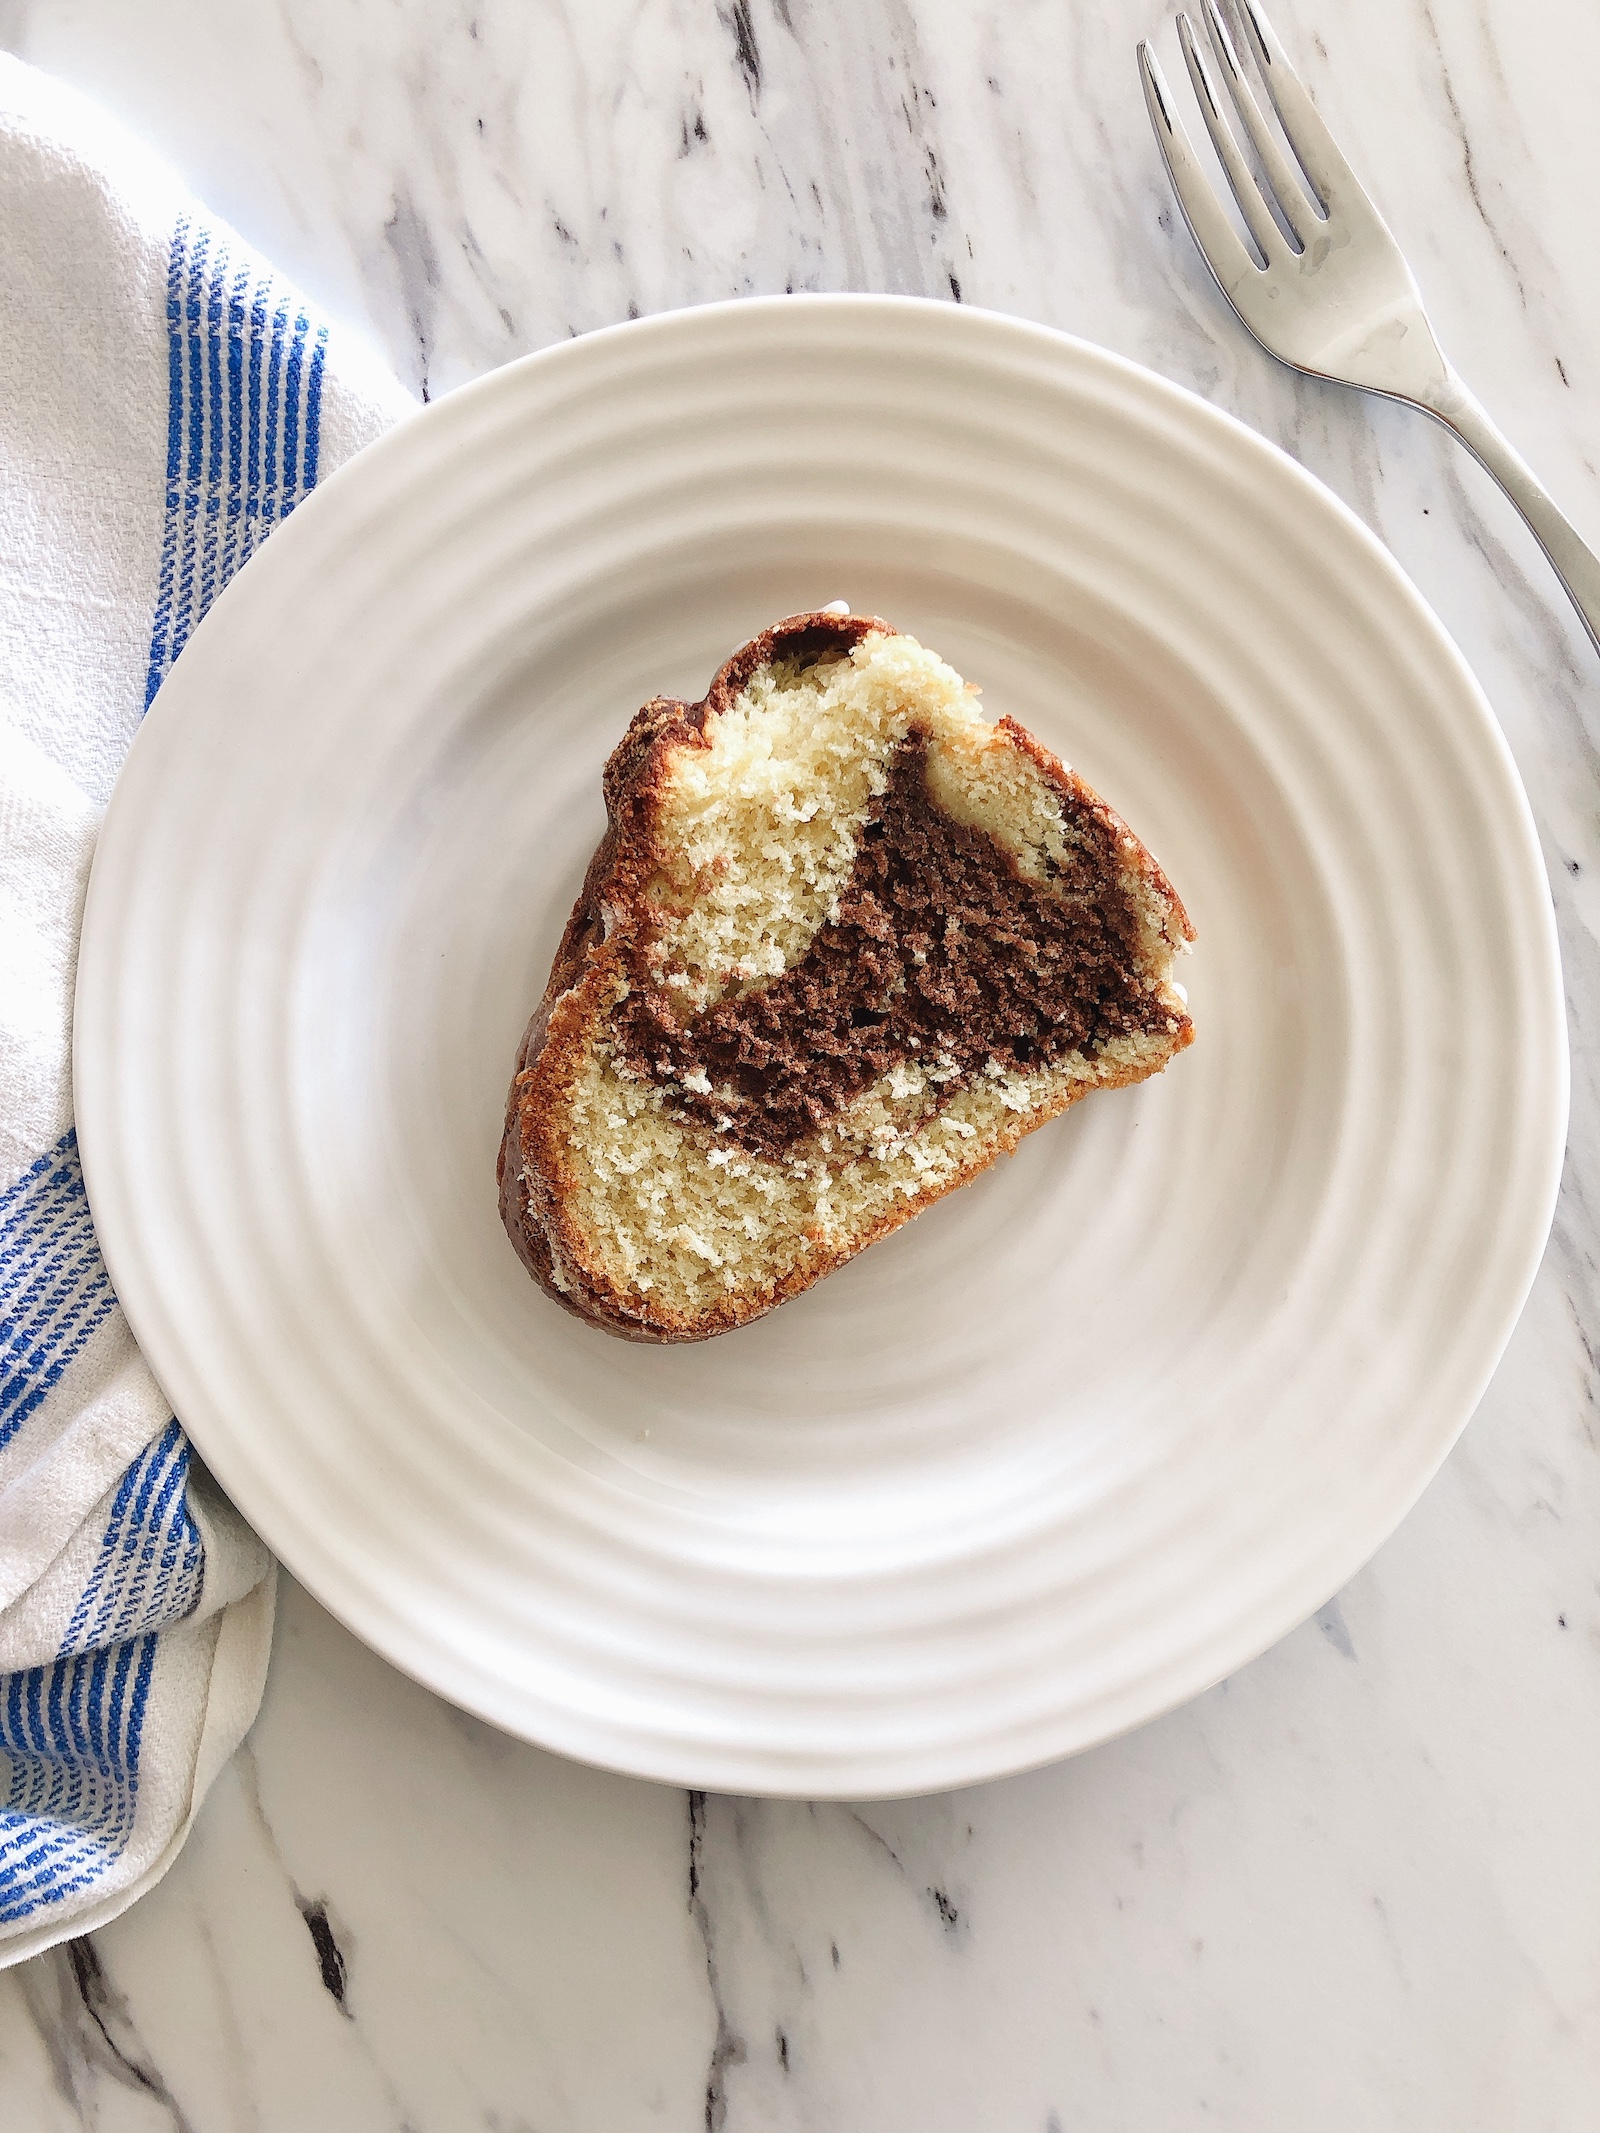 One slice of vanilla and chocolate spelt marble cake lying on its side on a small white plate with a blue and white tea towel tucked under the plate.